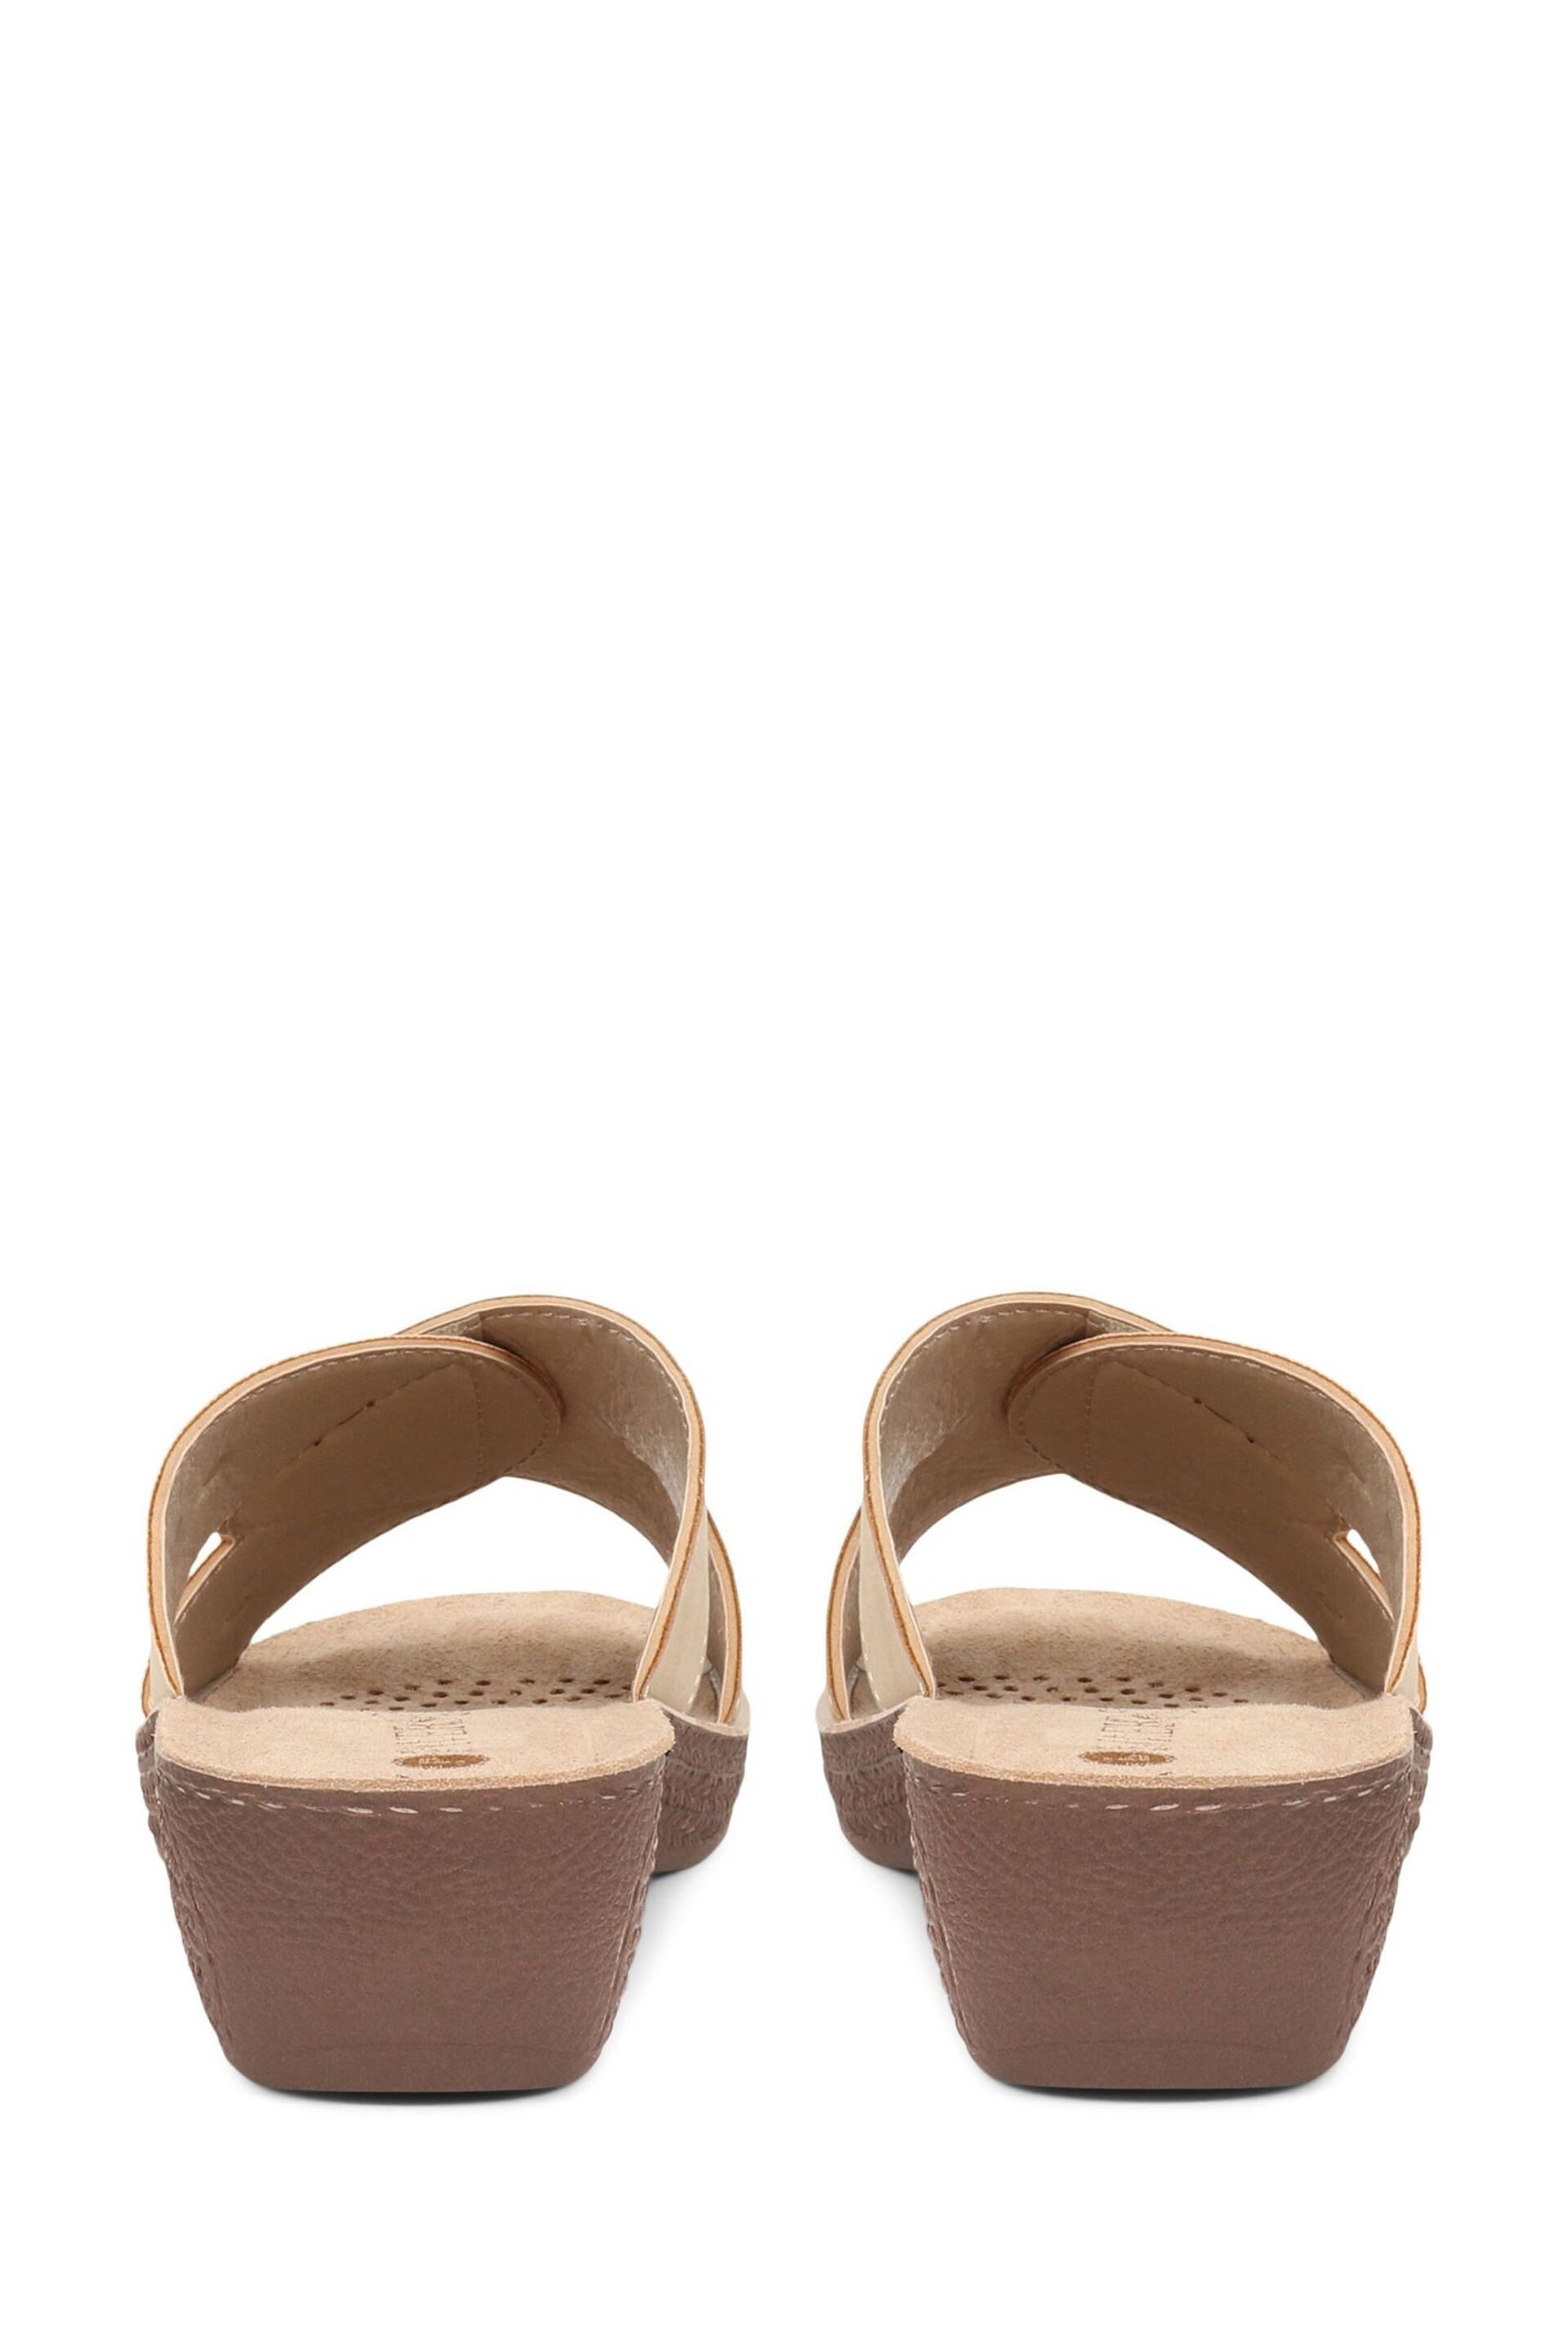 Pavers Comfortable Button Detail Sandals - Image 4 of 5